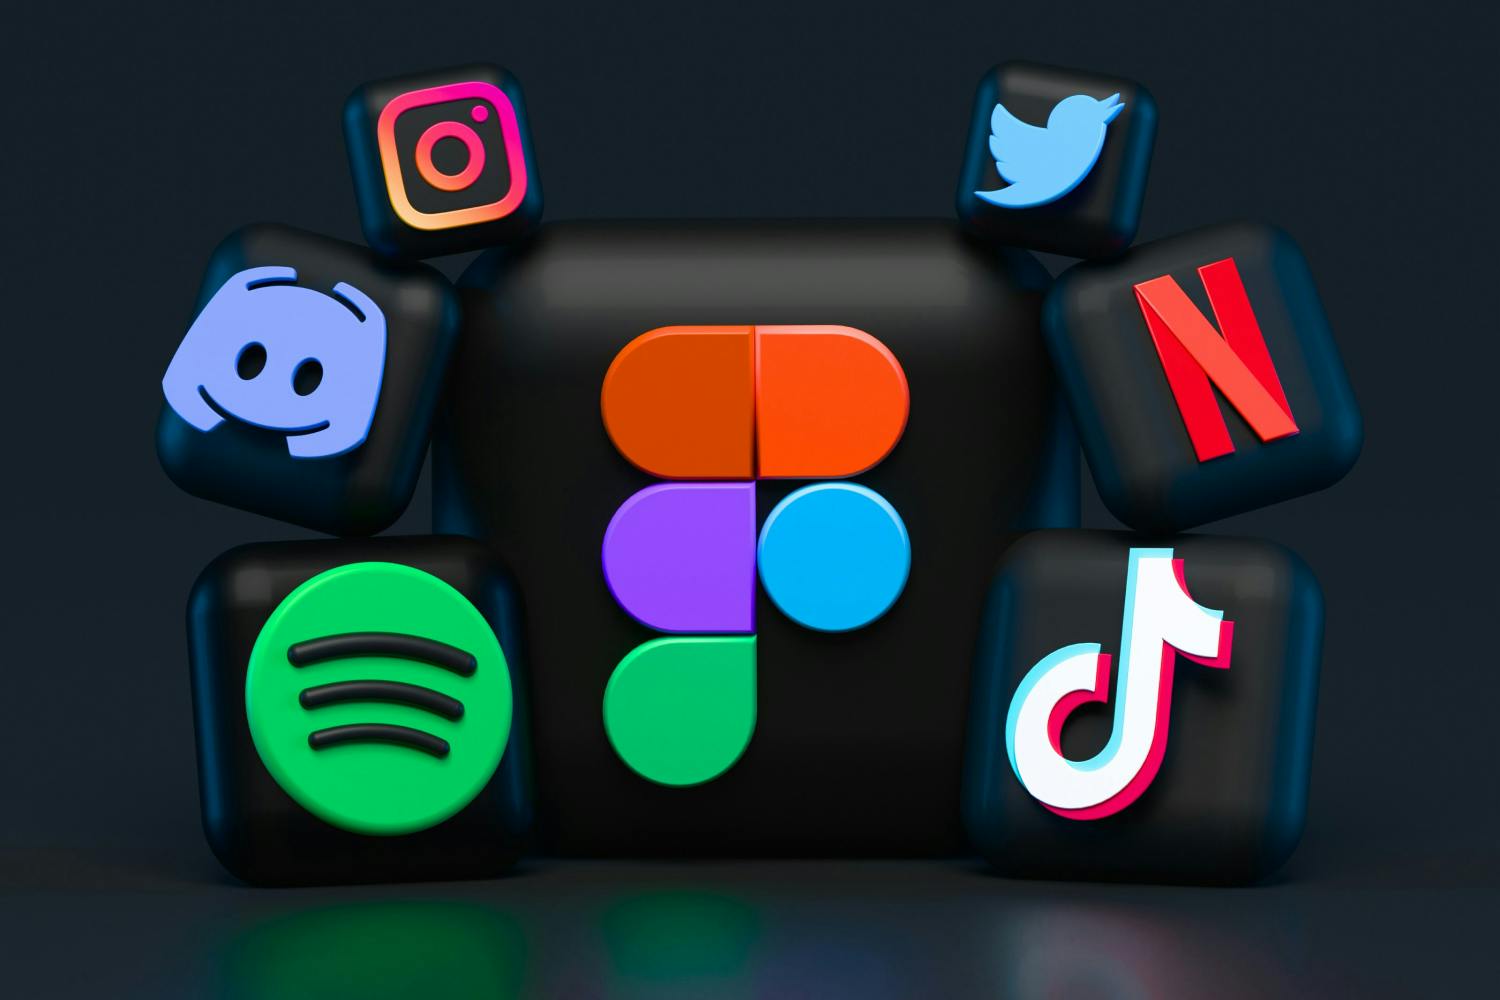 3d art of social networks icons